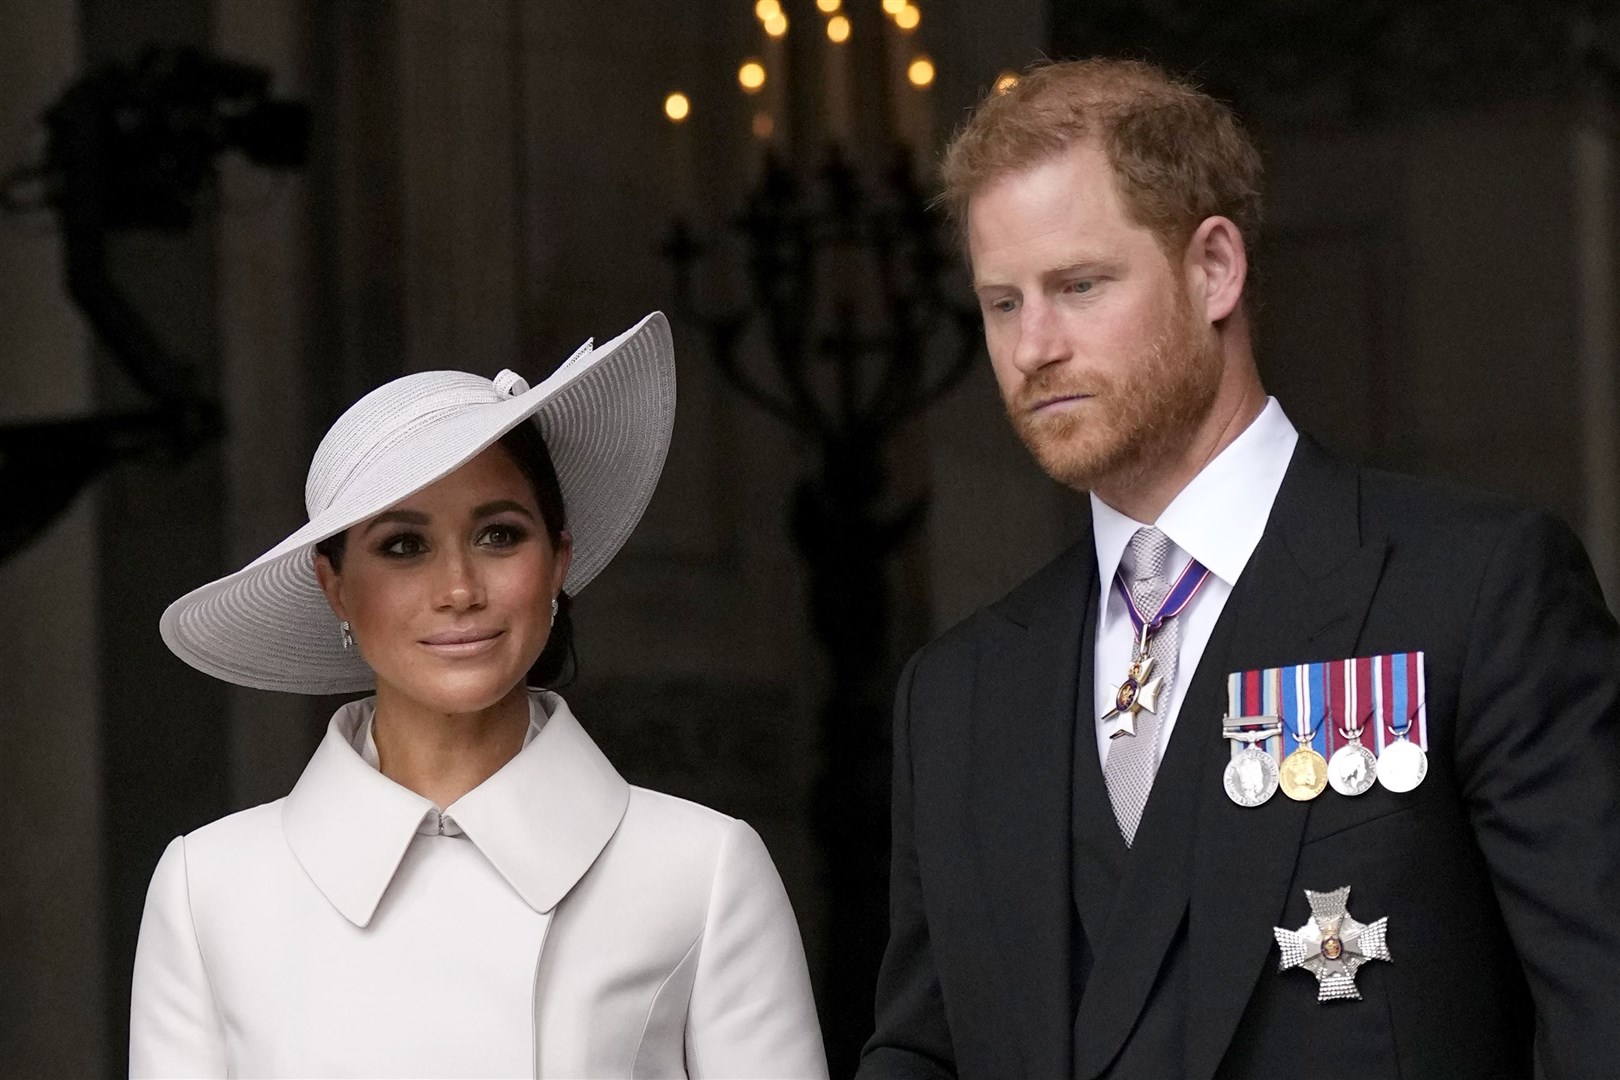 The Duke and Duchess of Sussex returned to the UK for the Queen’s Platinum Jubilee celebrations in June (Matt Dunham/PA)